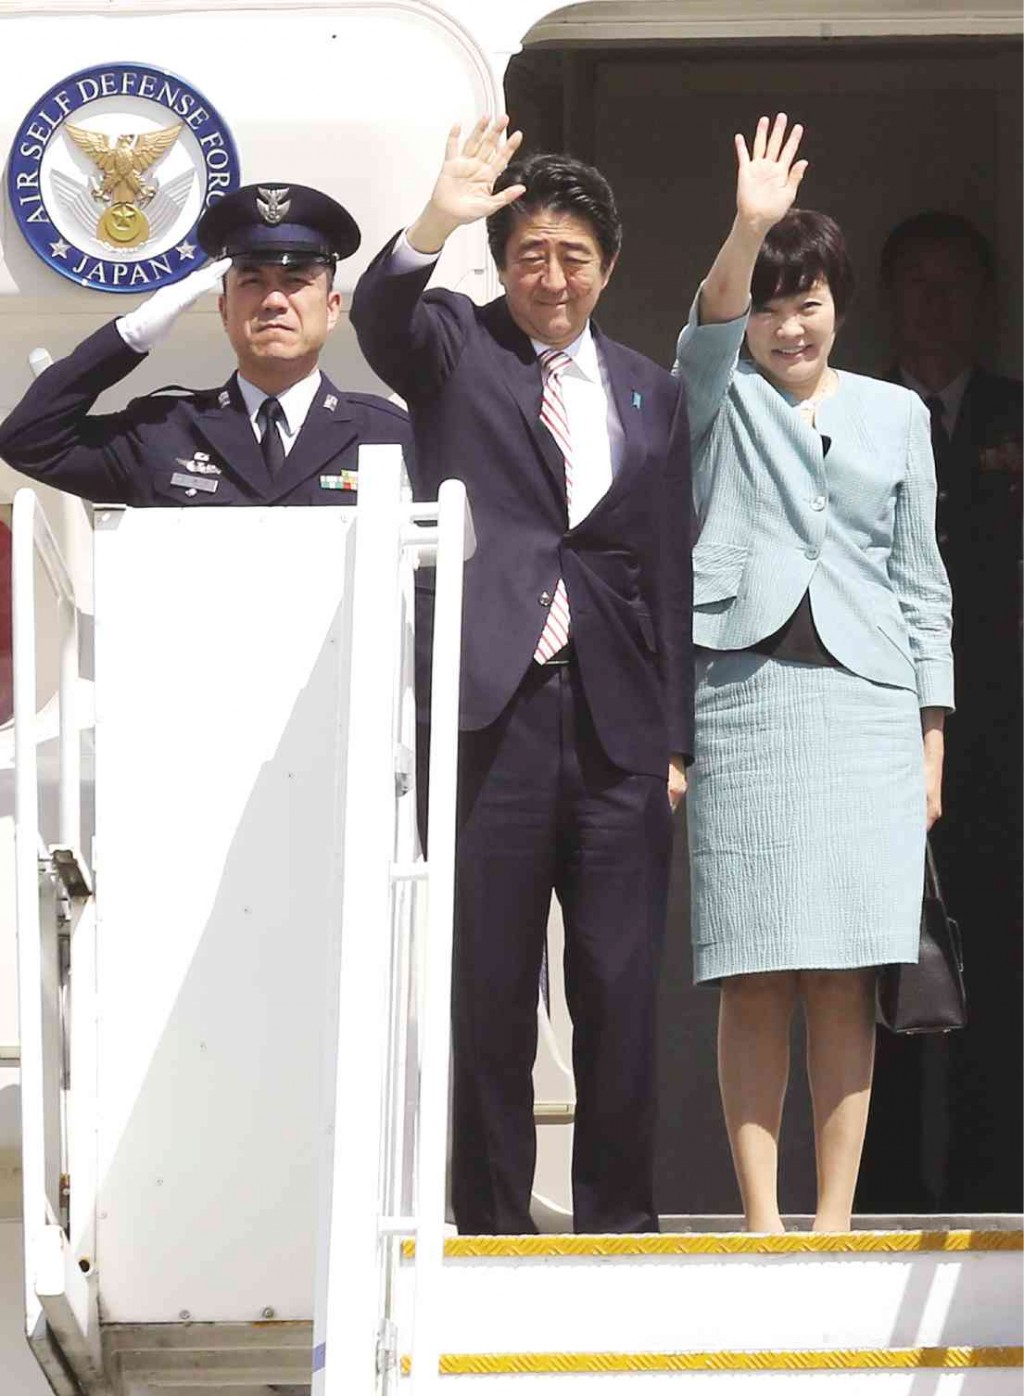 THANKS FOR COMING, THE MEMORIES Japanese Prime Minister Shinzo Abe and wife Akie Abe, US President Barack Obama and Apec’s heartthrob, with Mexican President Enrique Nieto, Canadian Prime Minister Justin Trudeau wave goodbye as they board their planes at Ninoy Aquino International Airport on Friday after attending the Asia-Pacific Economic Cooperation summit in Manila. Some of the heads of economies flew to Kuala Lumpur for the Asean/East Asia Summit over the weekend. JOAN BONDOC/EDWIN BACASMAS/MARIANNE BERMUDEZ 